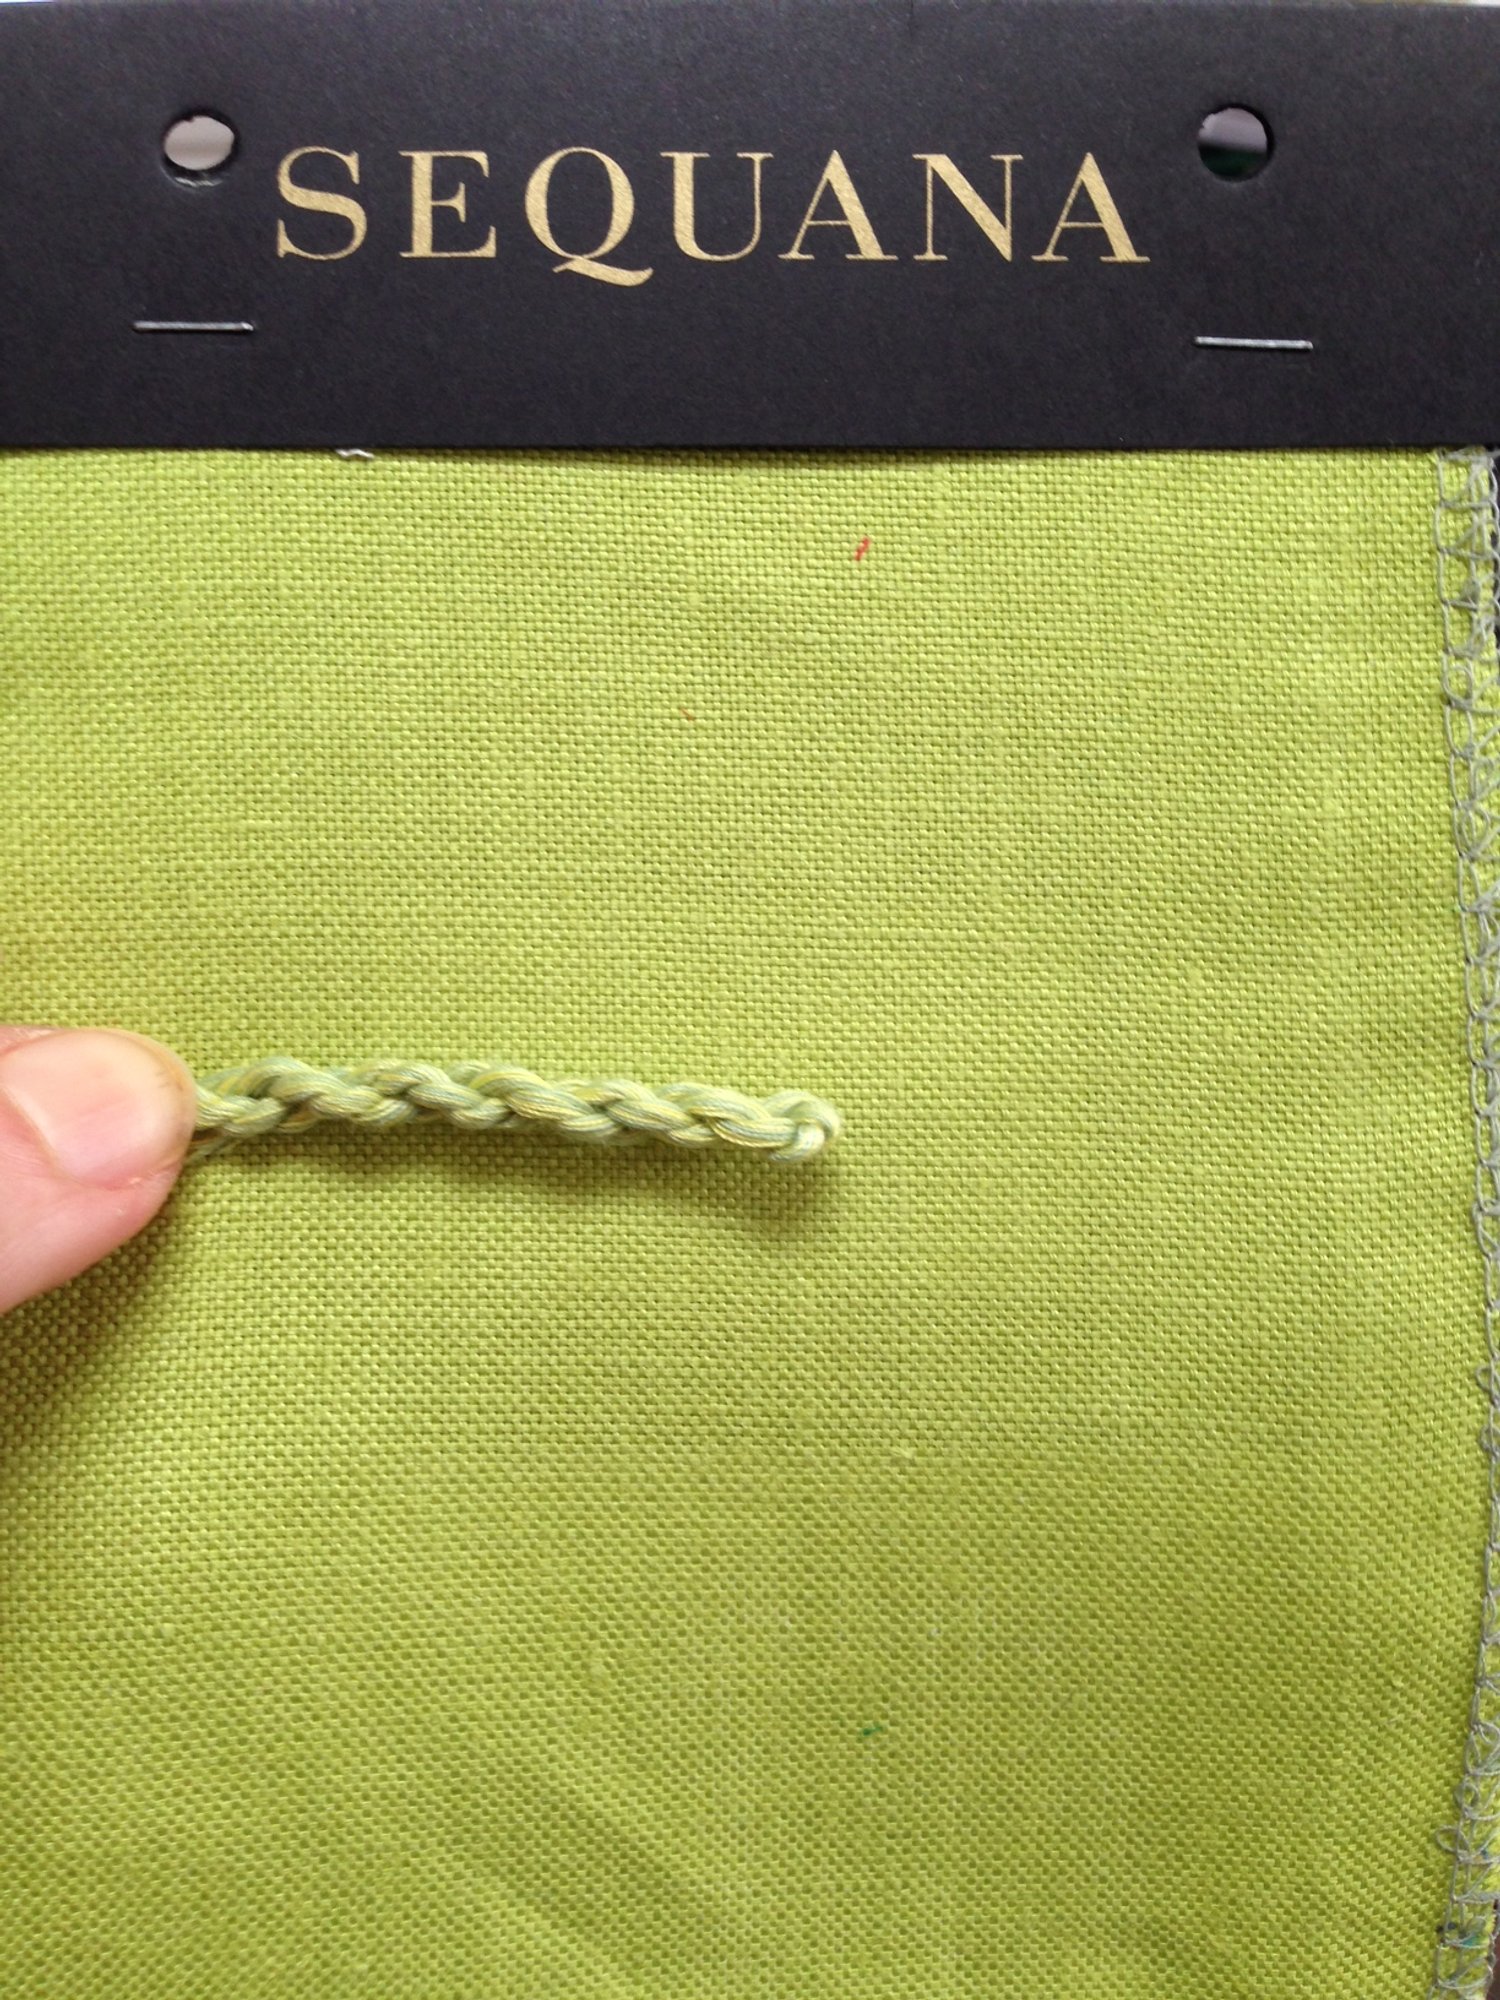 Colours for Sequana fabric.JPG